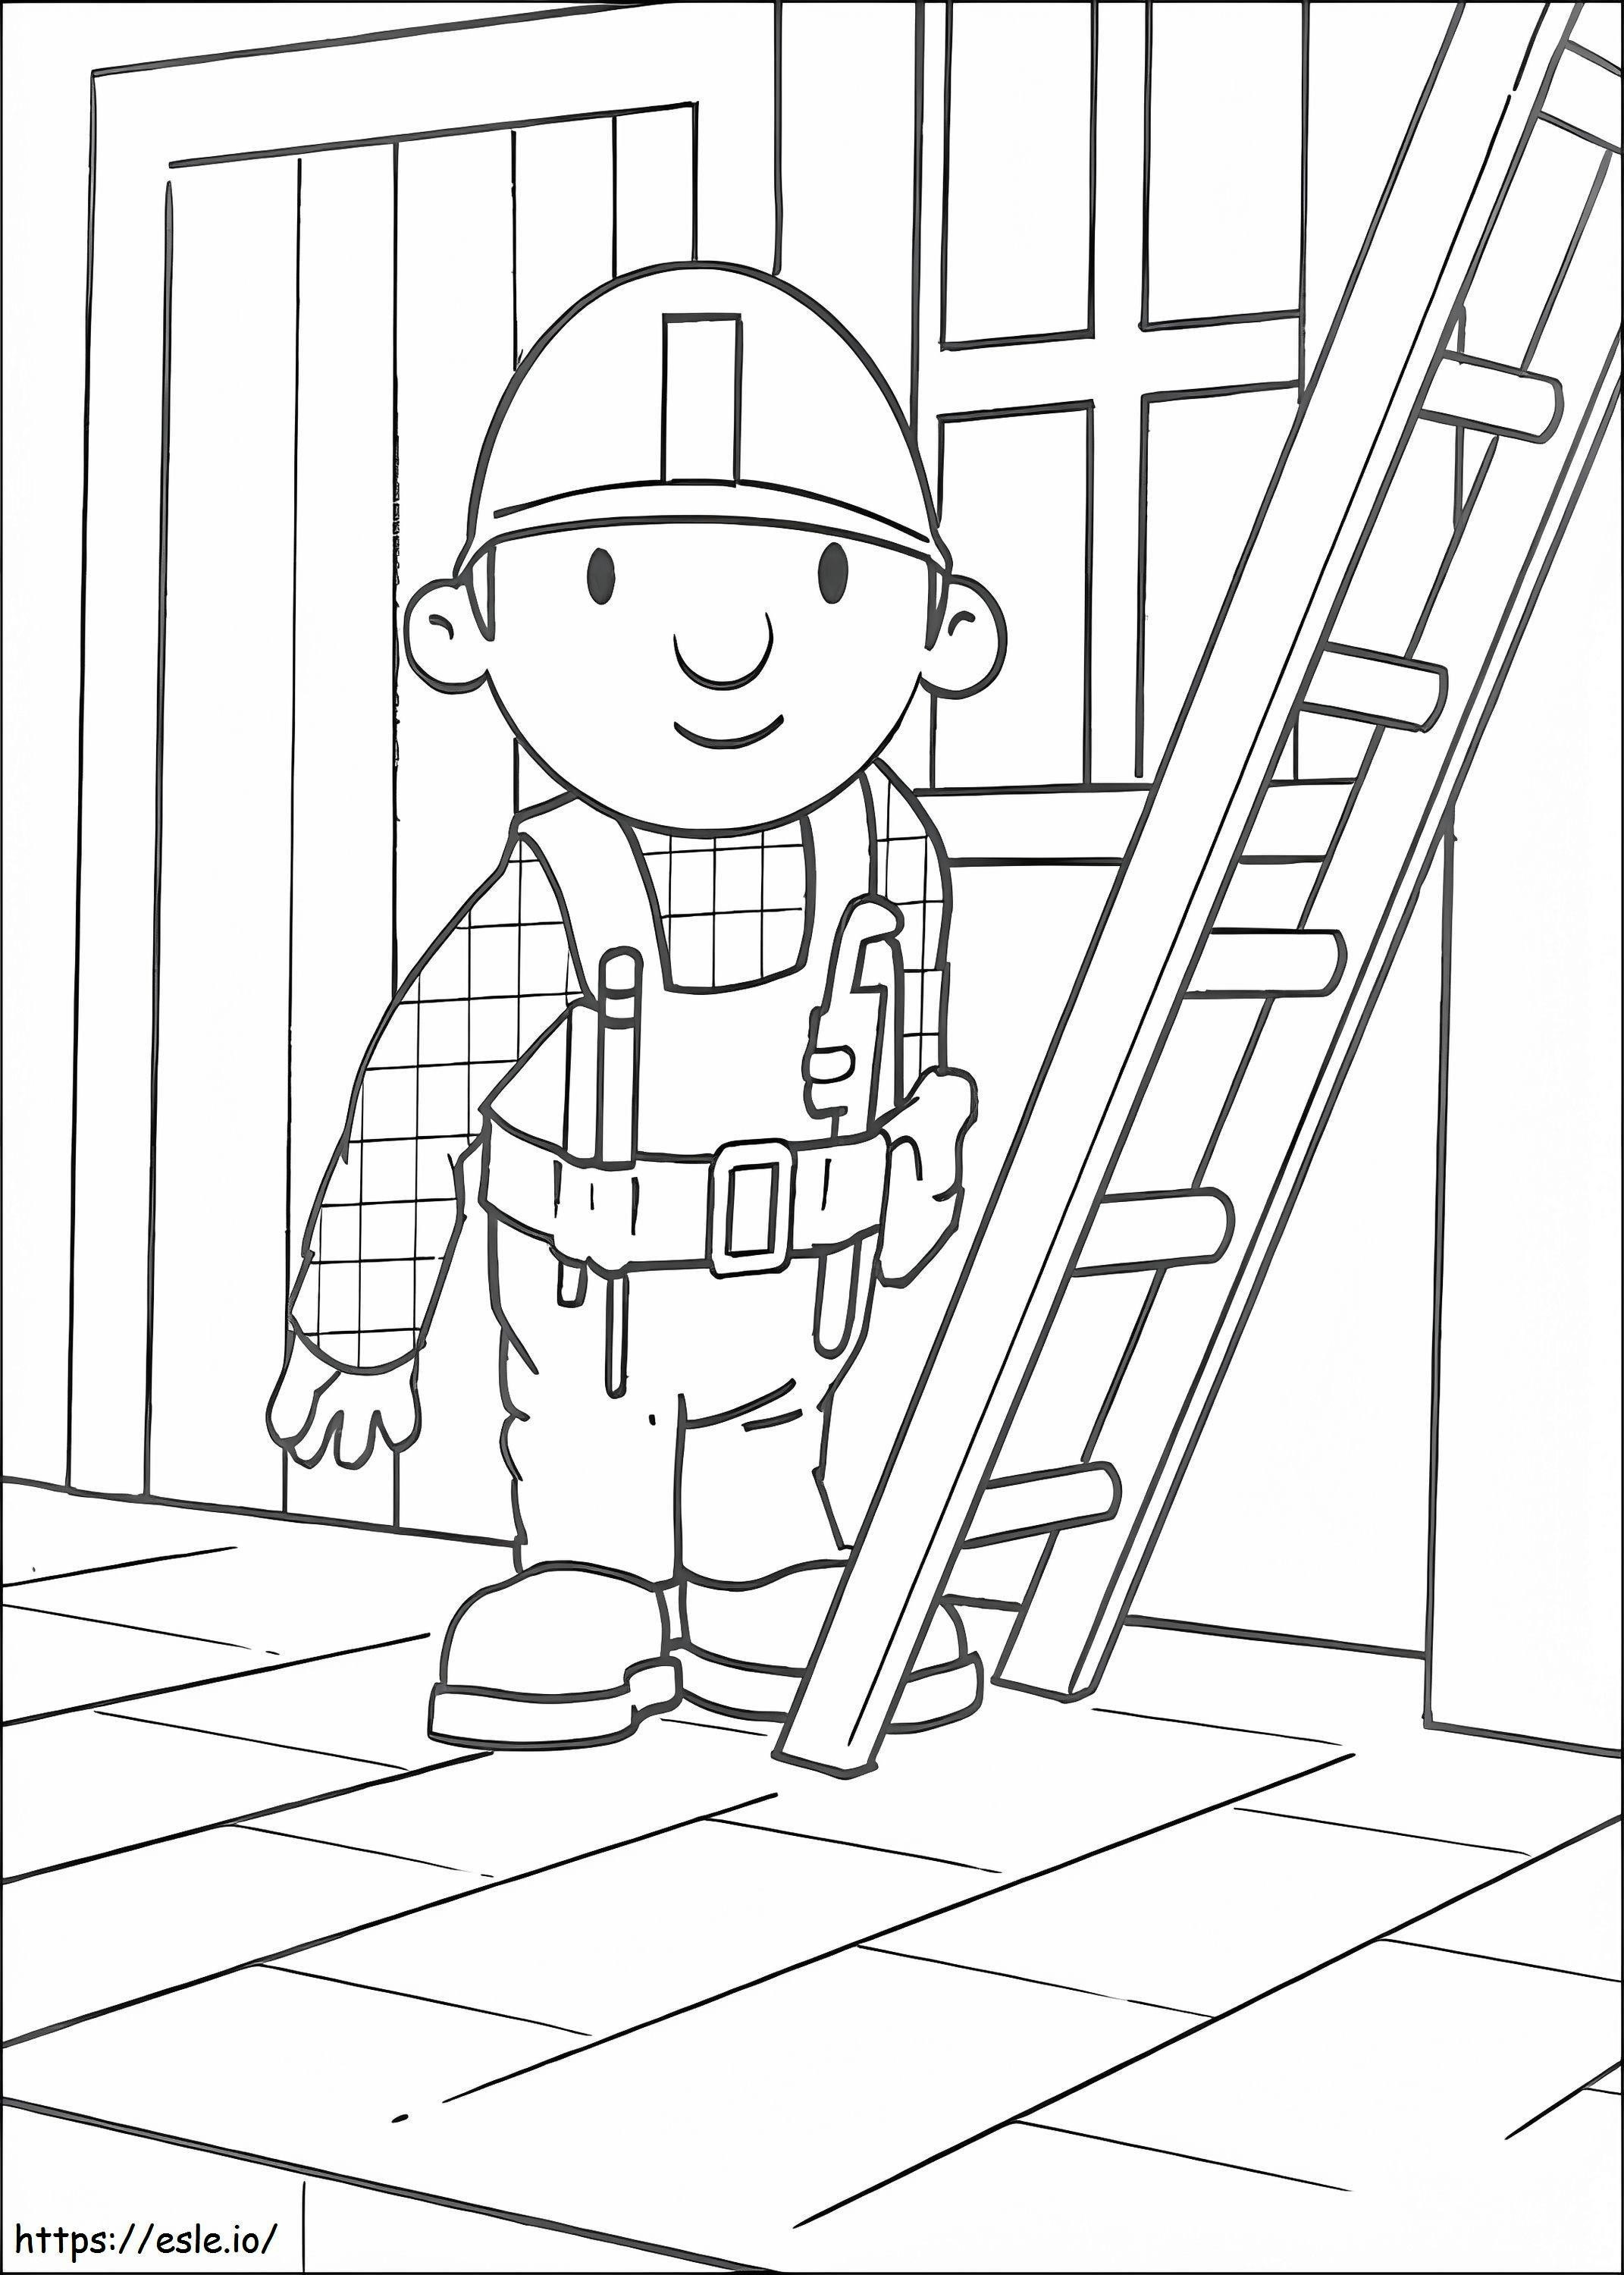 1534127047 Bob With Ladder A4 coloring page